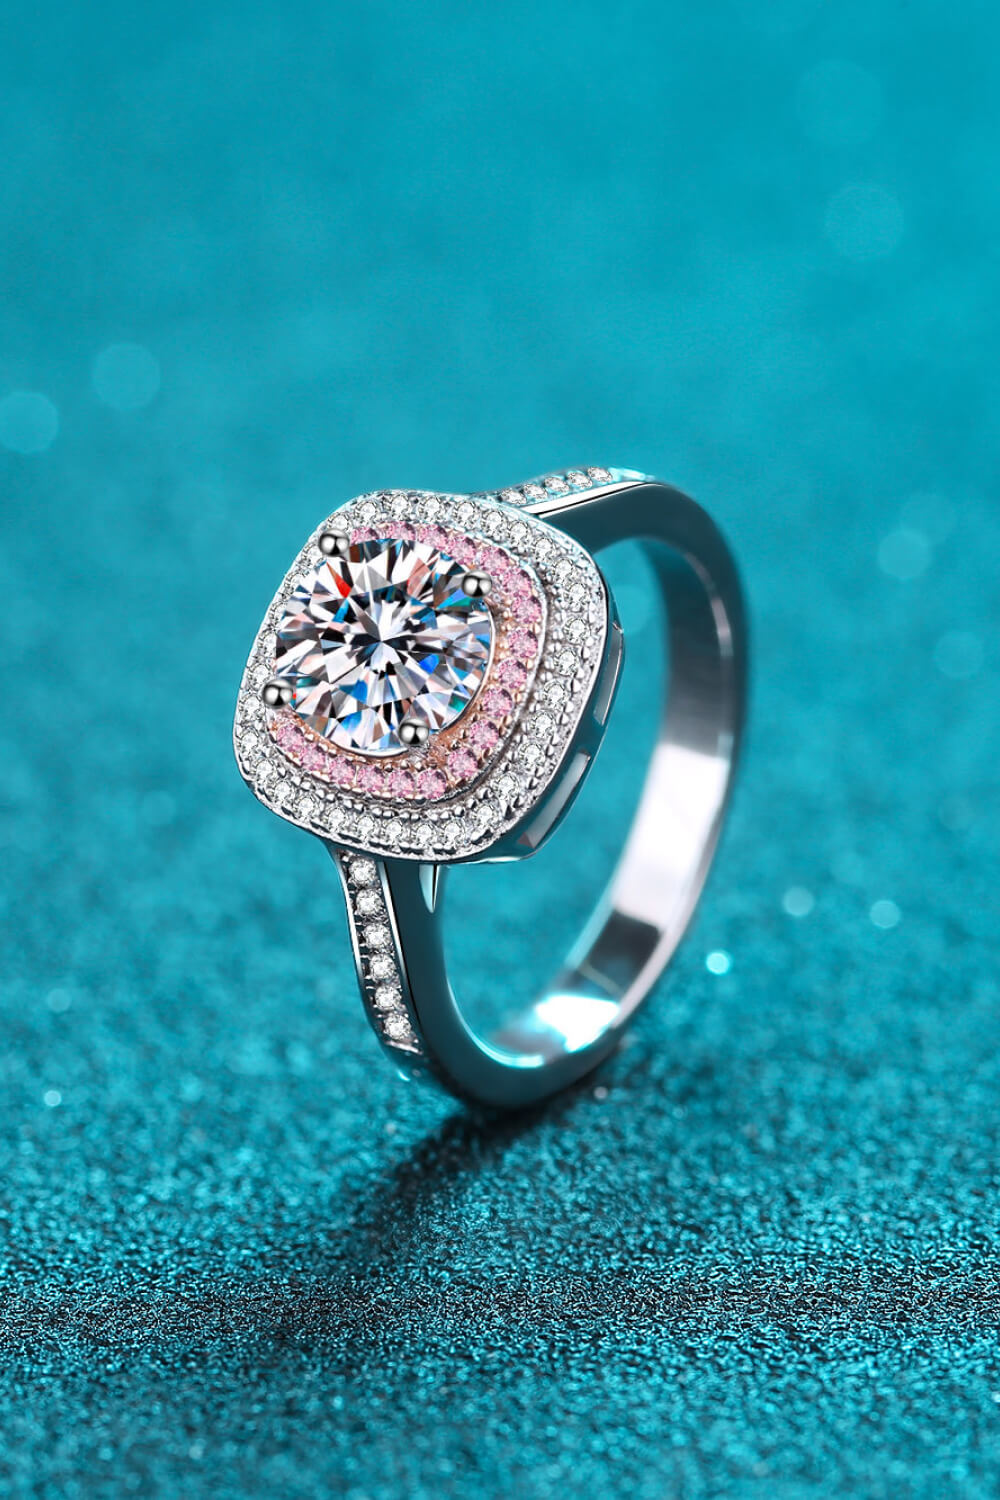 Women's Need You Now Moissanite Ring